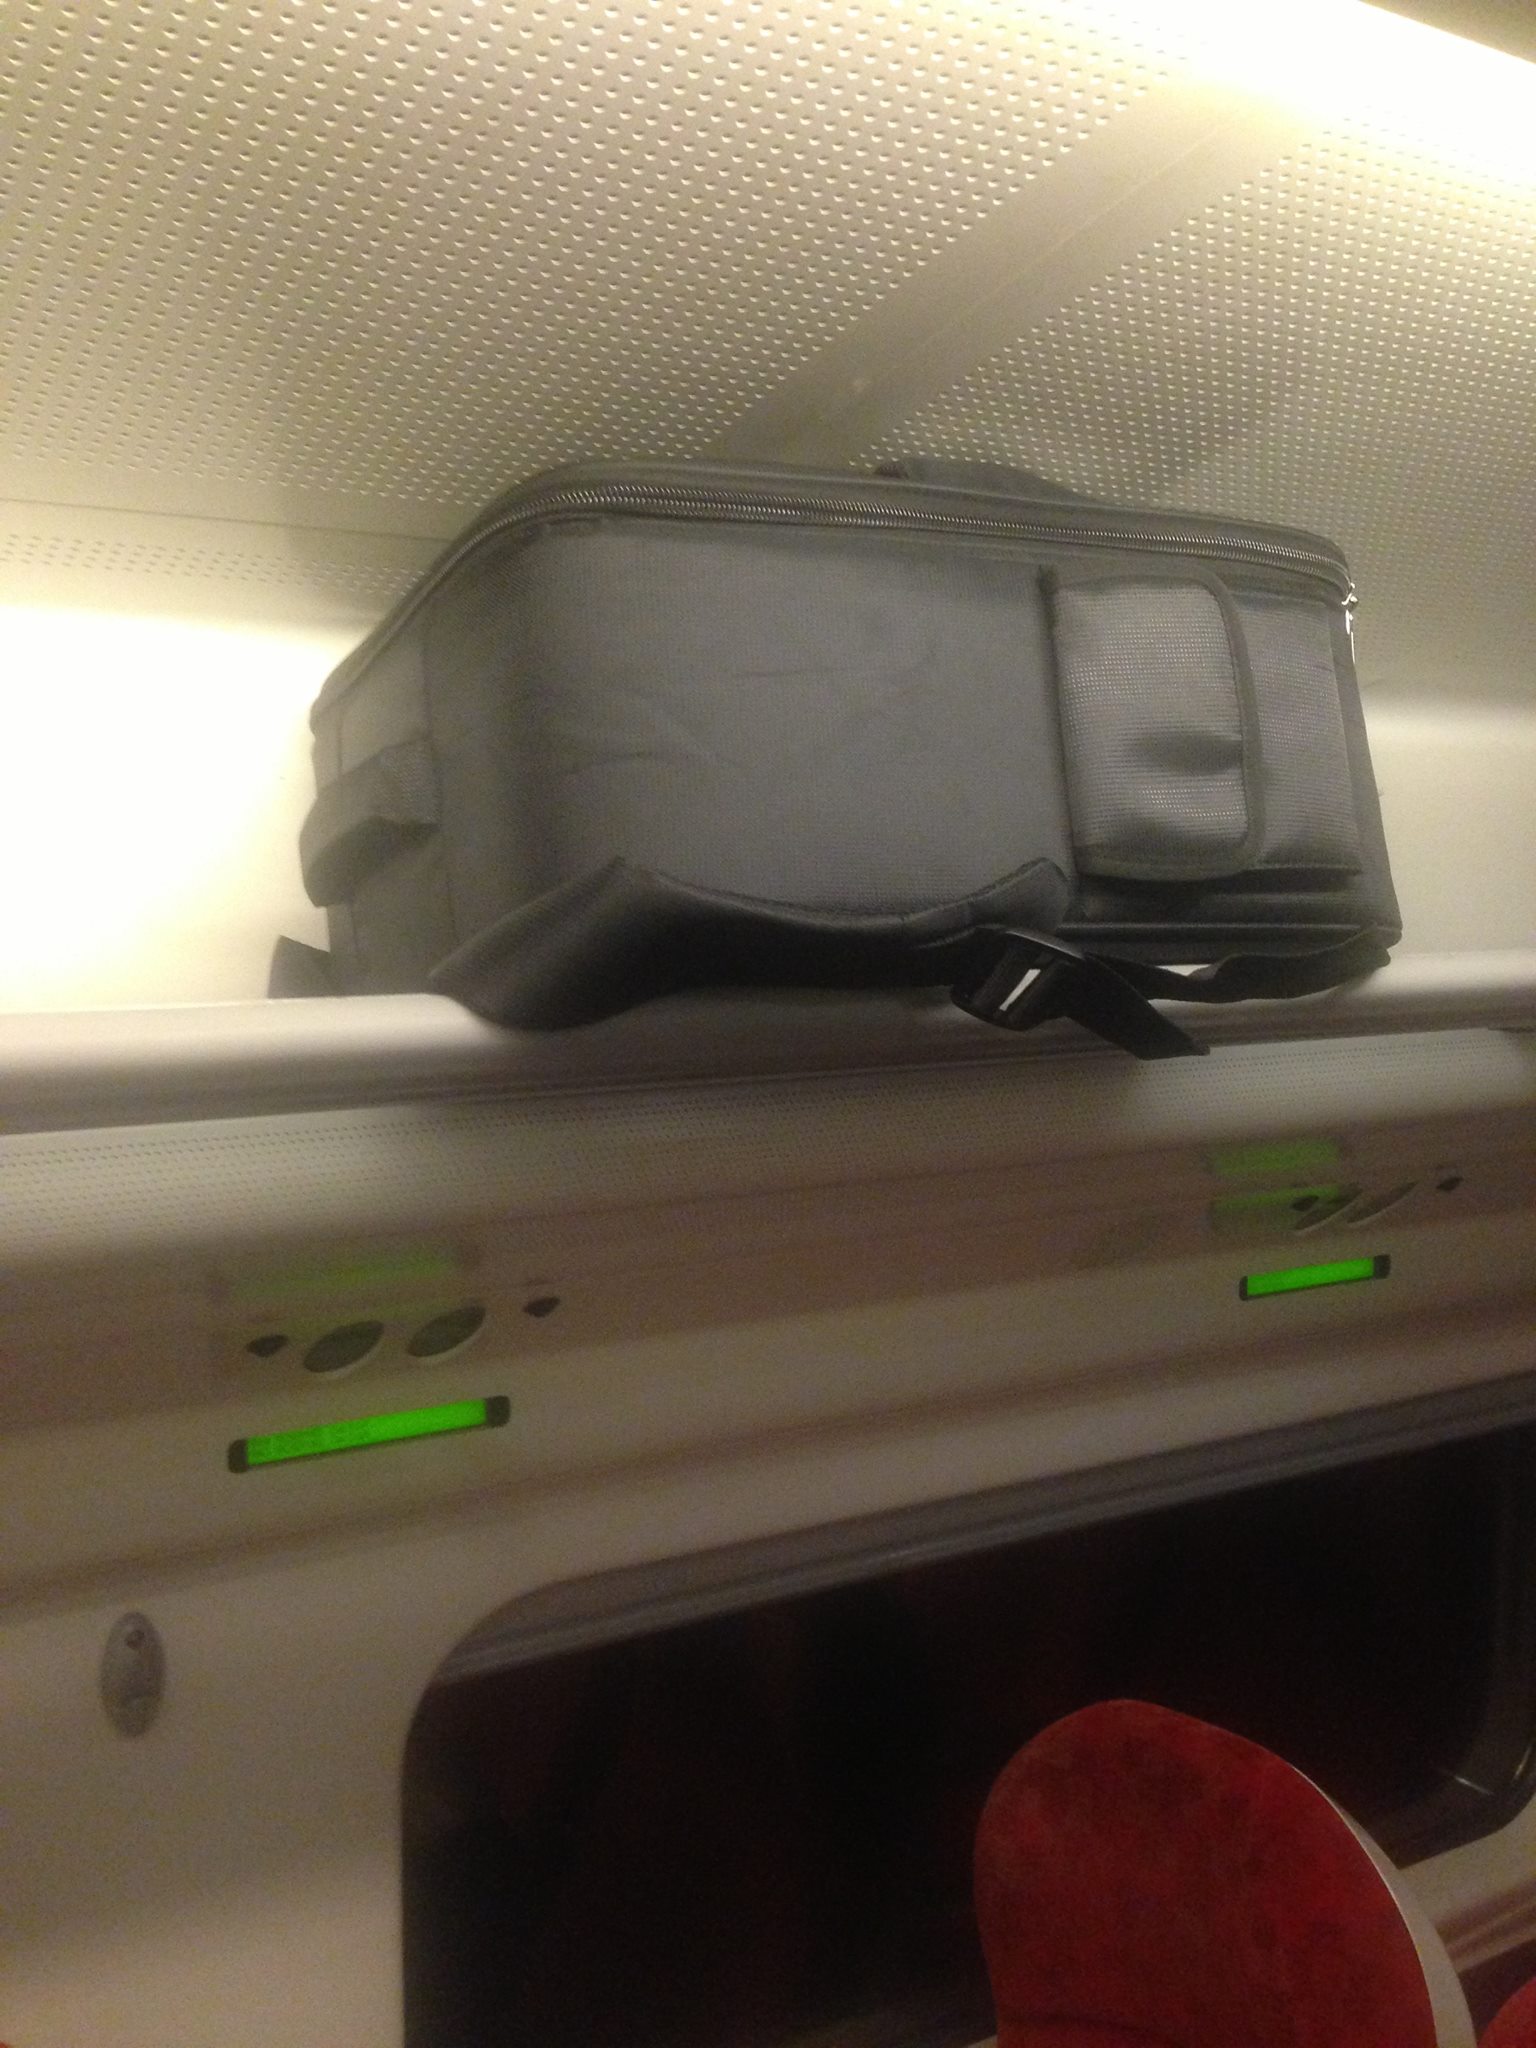 Drone in backpack on the train